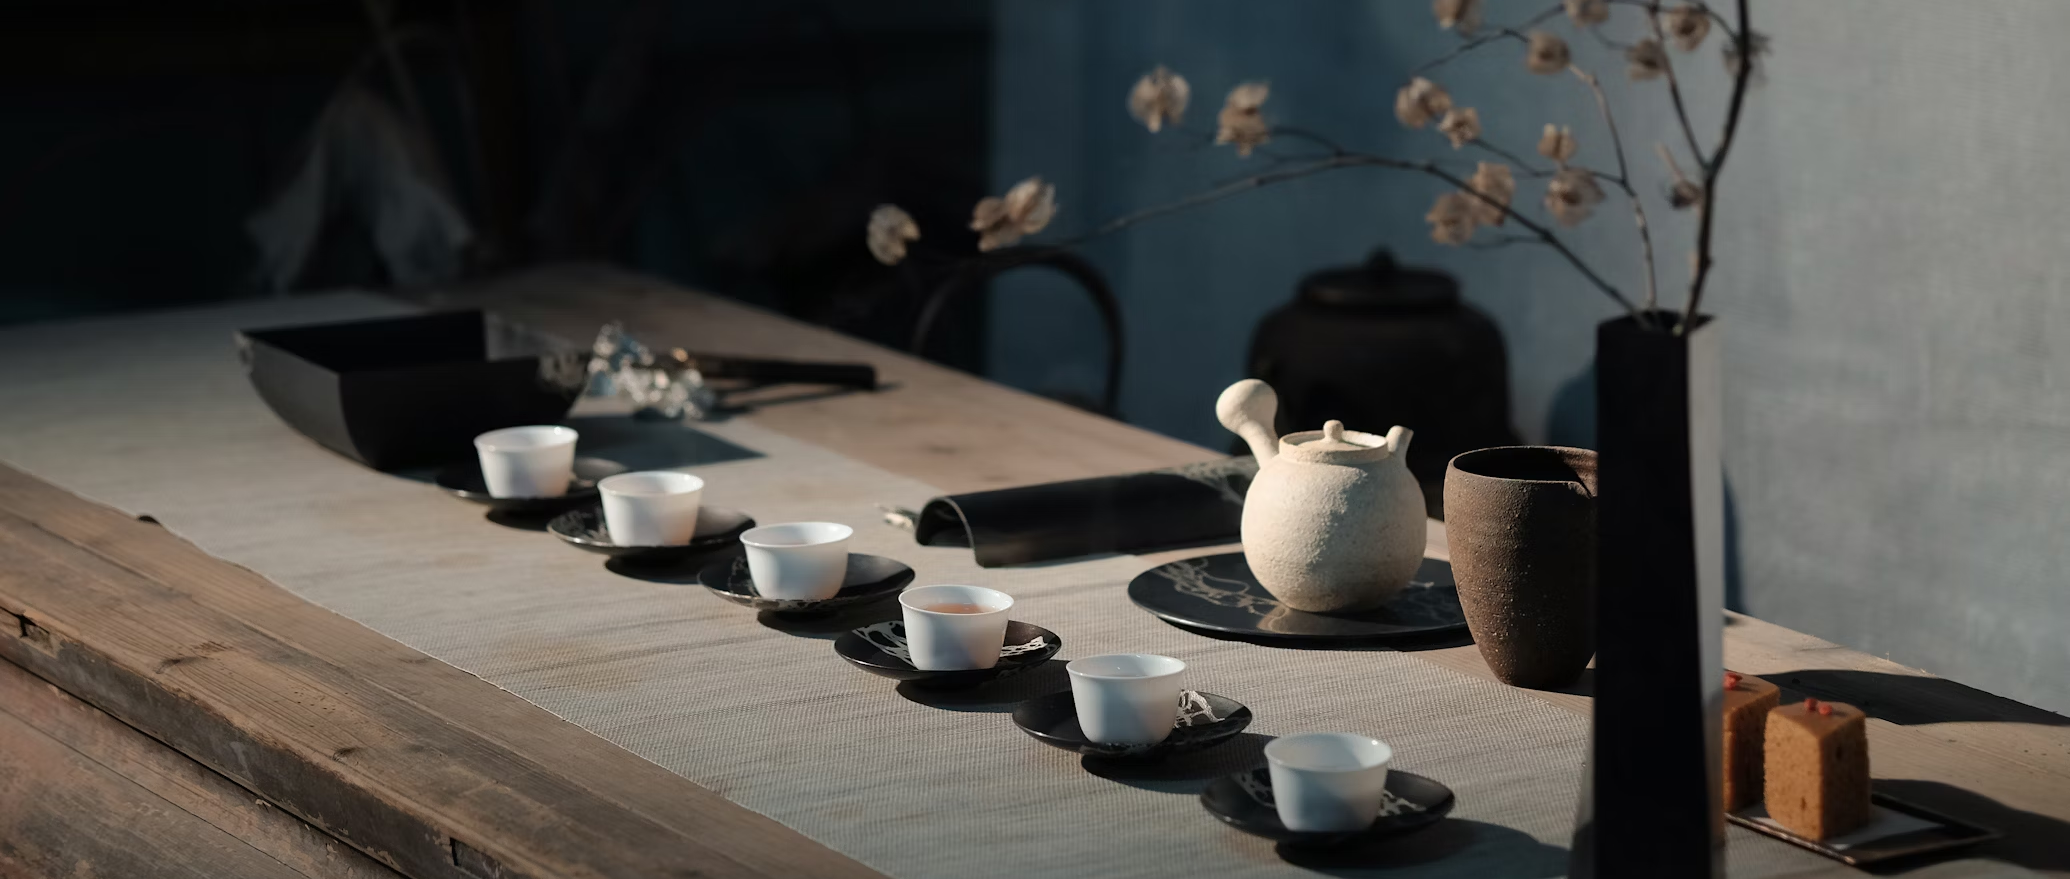 Aligned green tea cups arranged neatly in a row, set against a wooden tray, showcasing the serene elegance of a traditional Japanese tea ceremony.